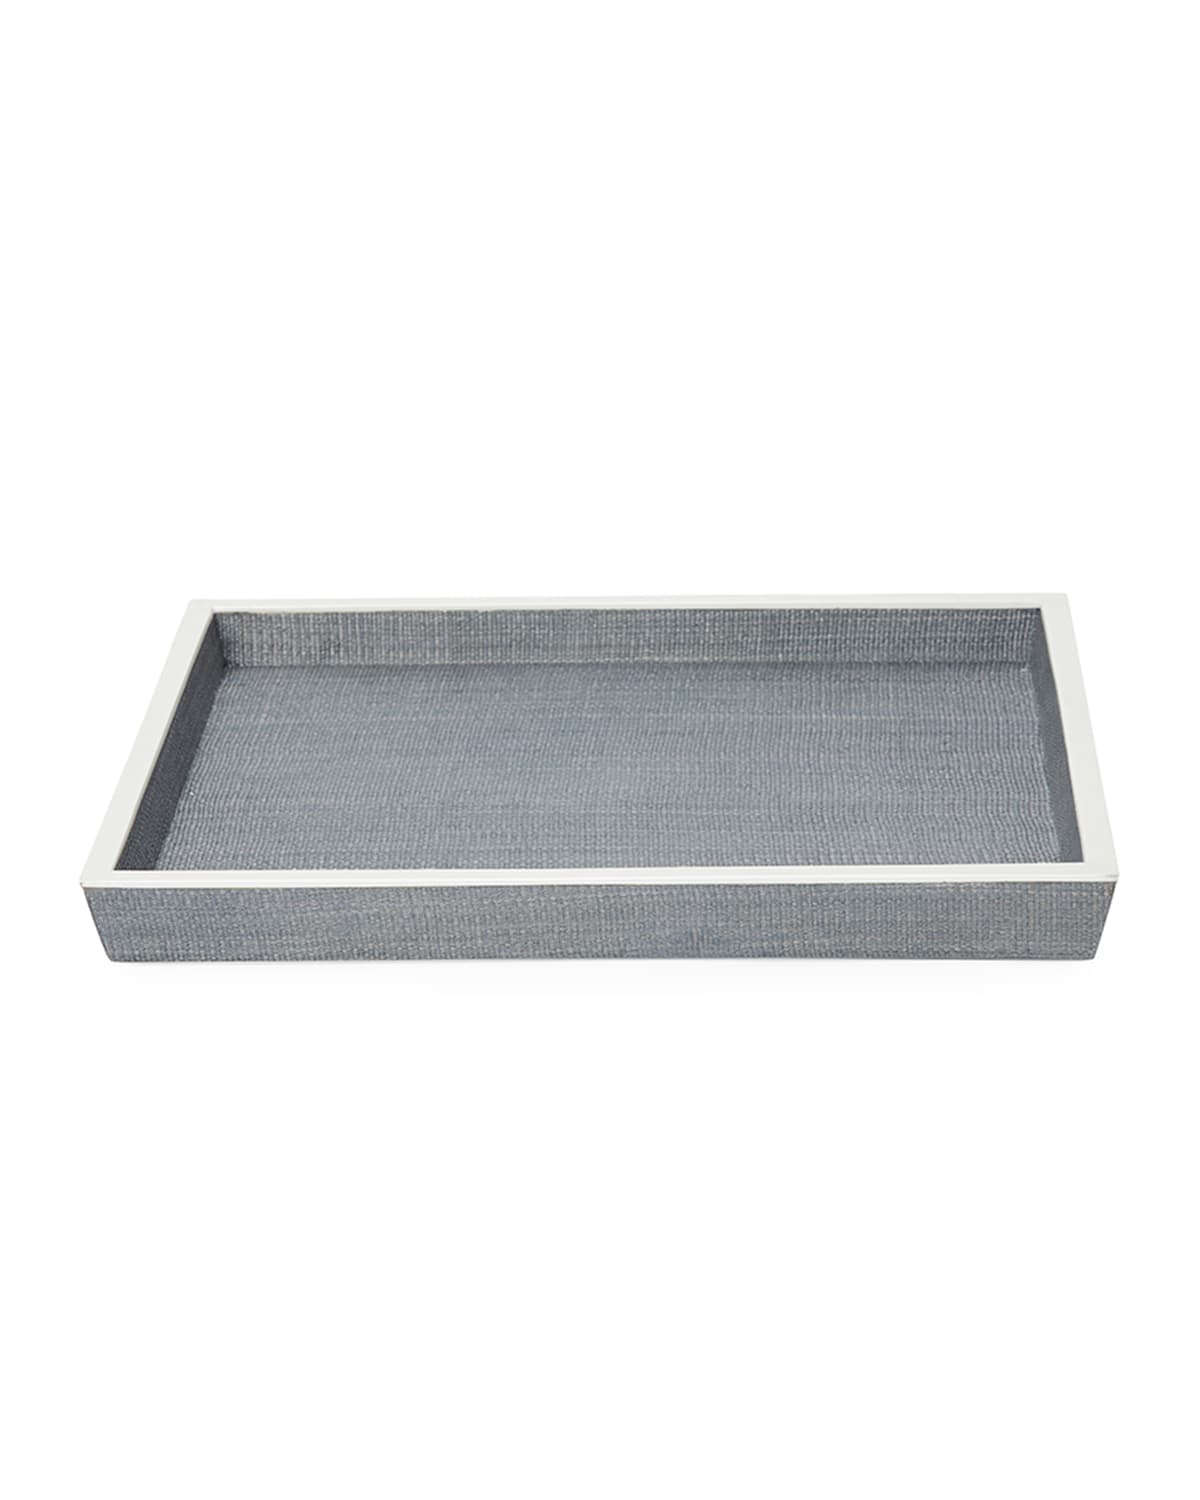 Pigeon & Poodle Maranello Large Tray In Blue